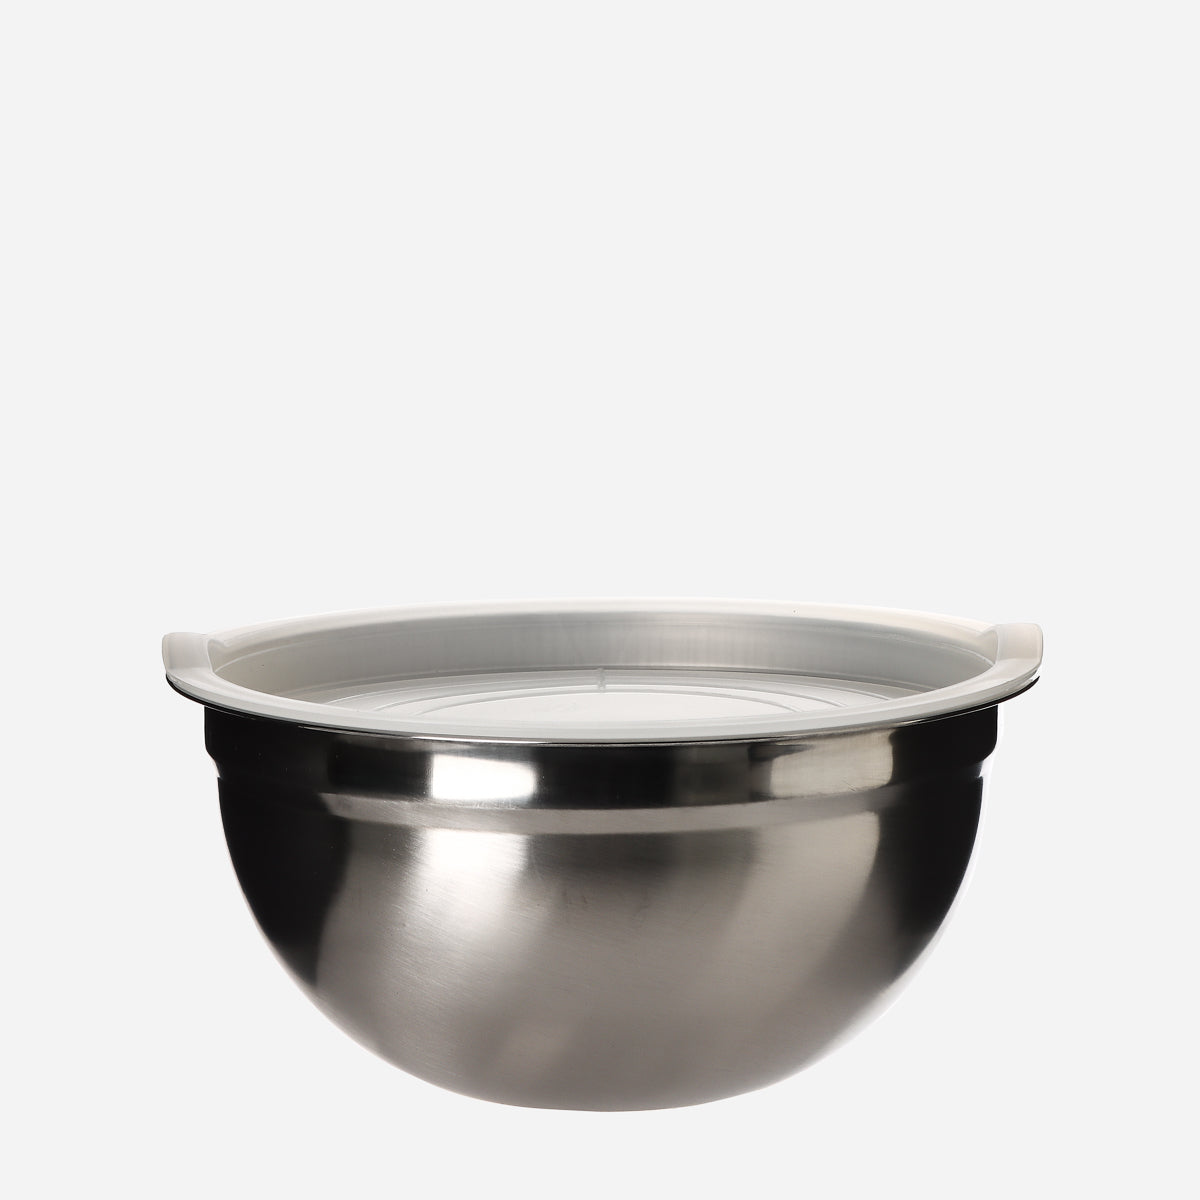 Lexi Home Stainless Steel Mixing Bowl Set - 2 Piece Suctioning